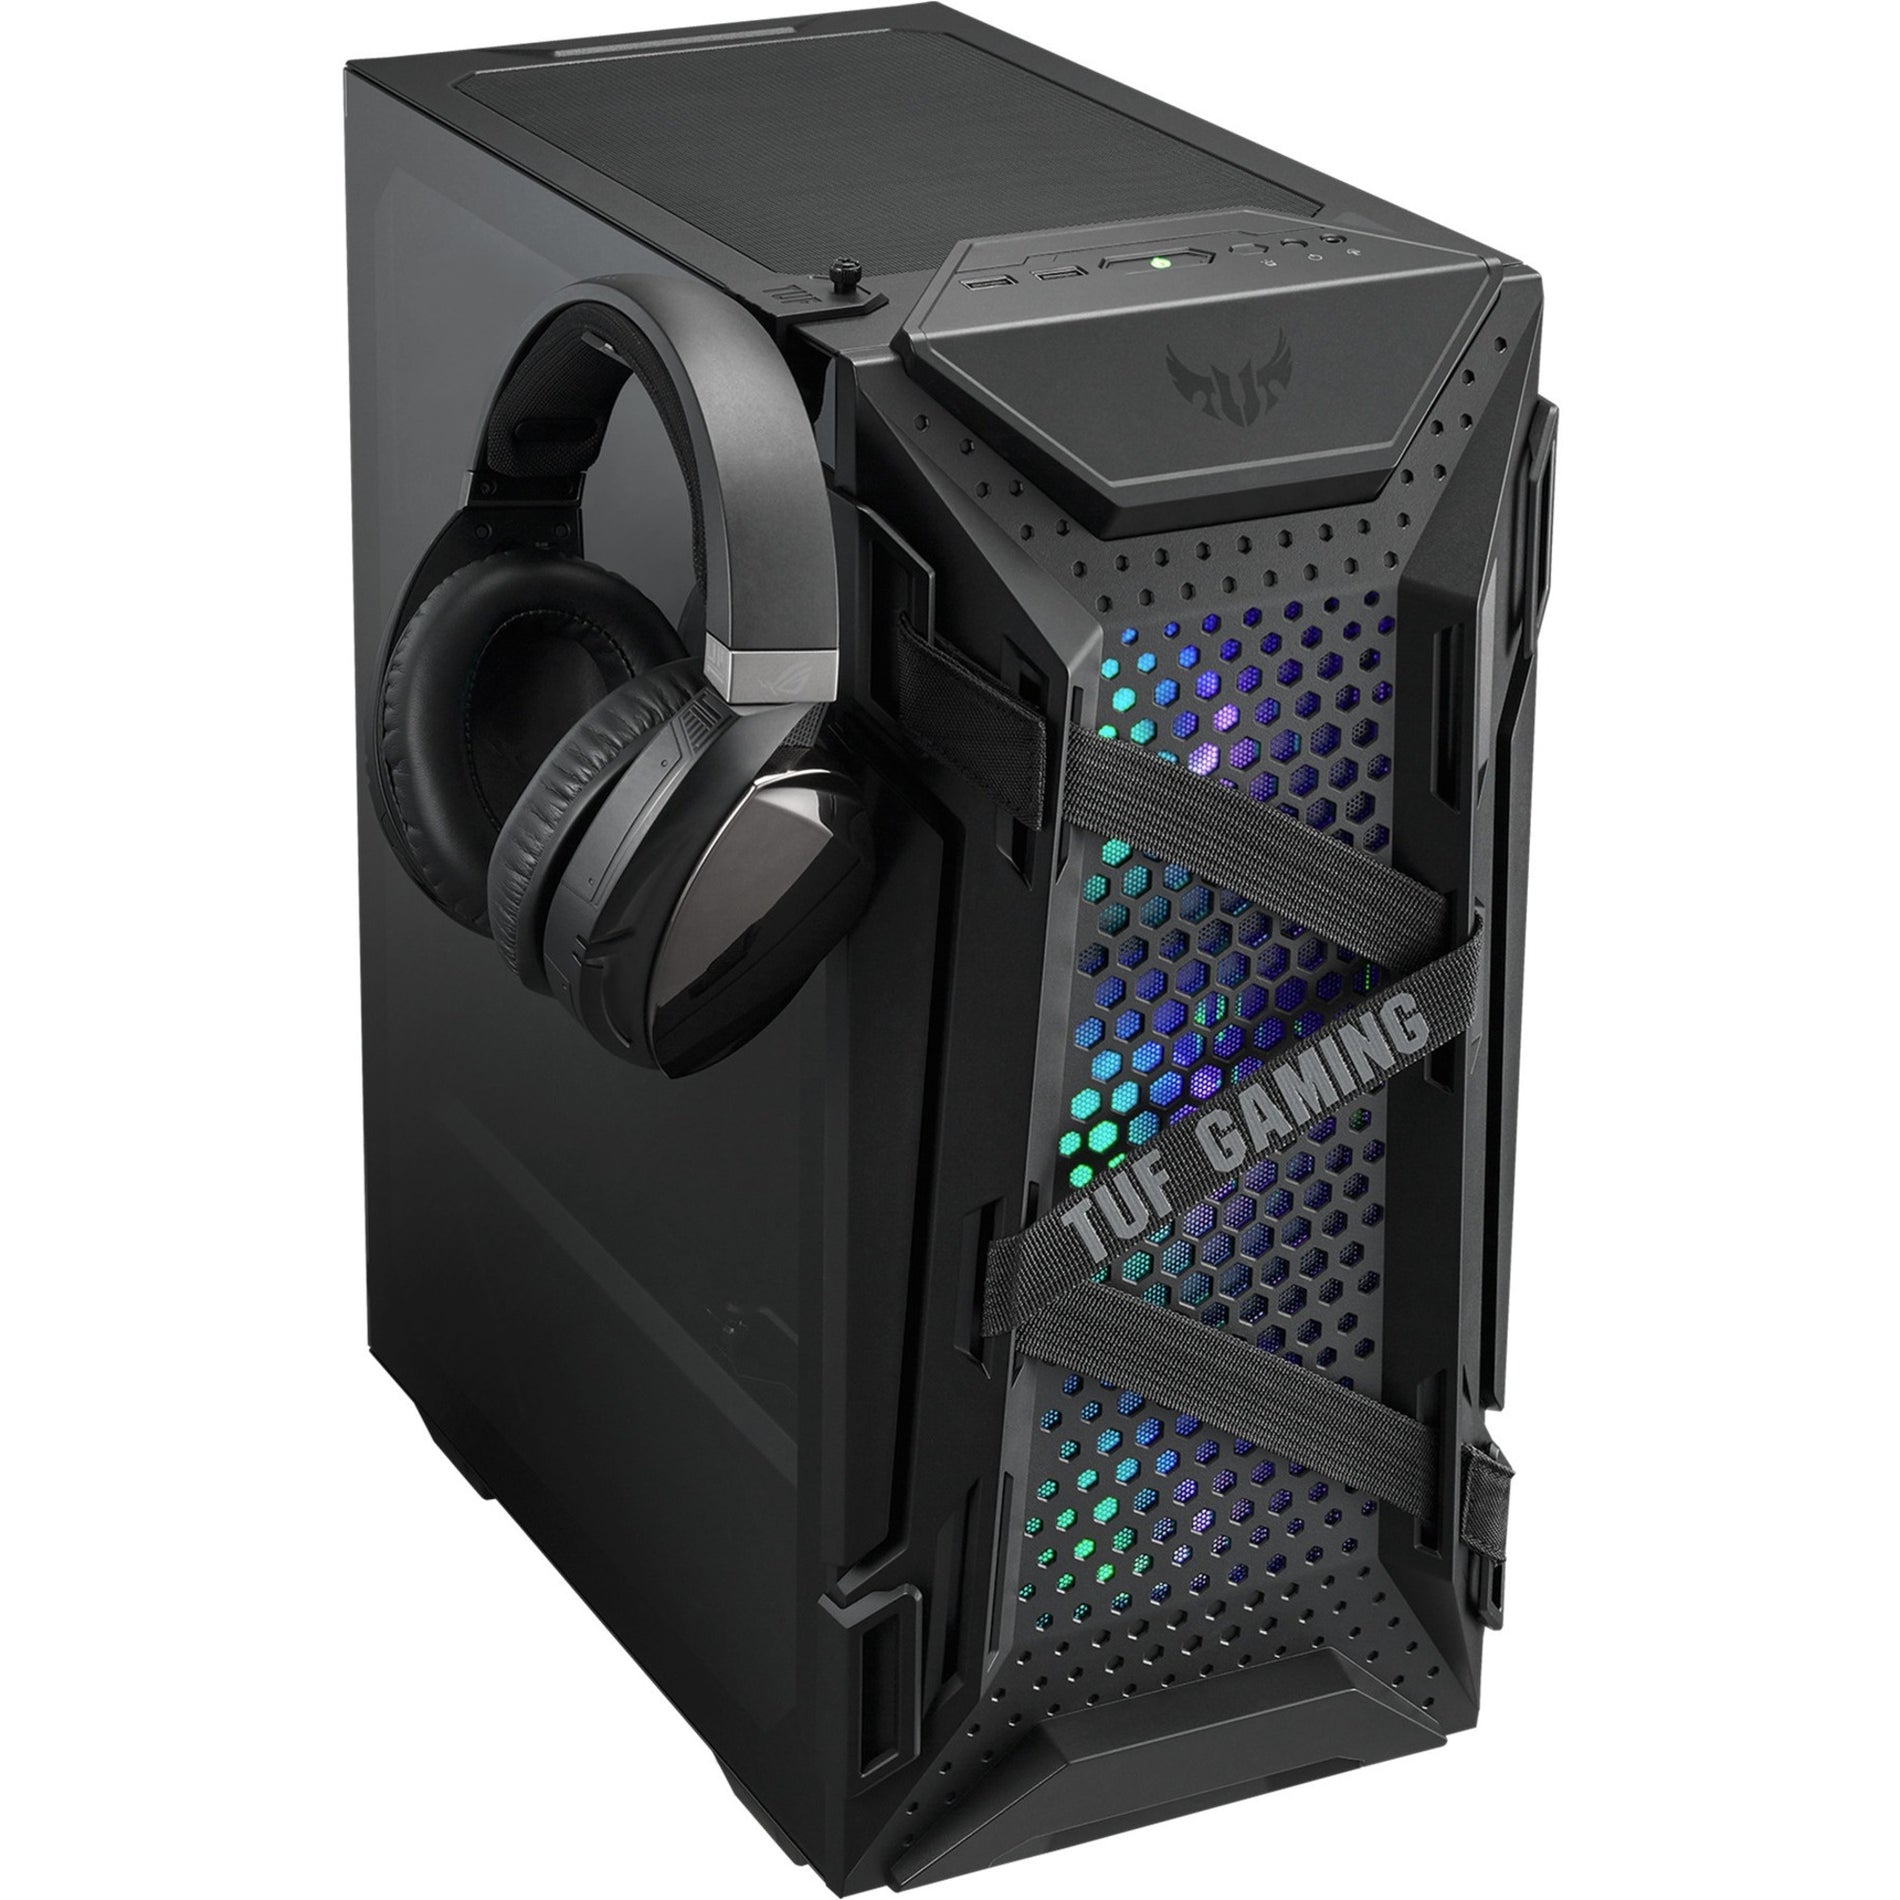 TUF GT301 GT301TUFGAMCASE Gaming Computer Case, Black Tempered Glass, 4.72" Fans, ATX Supported